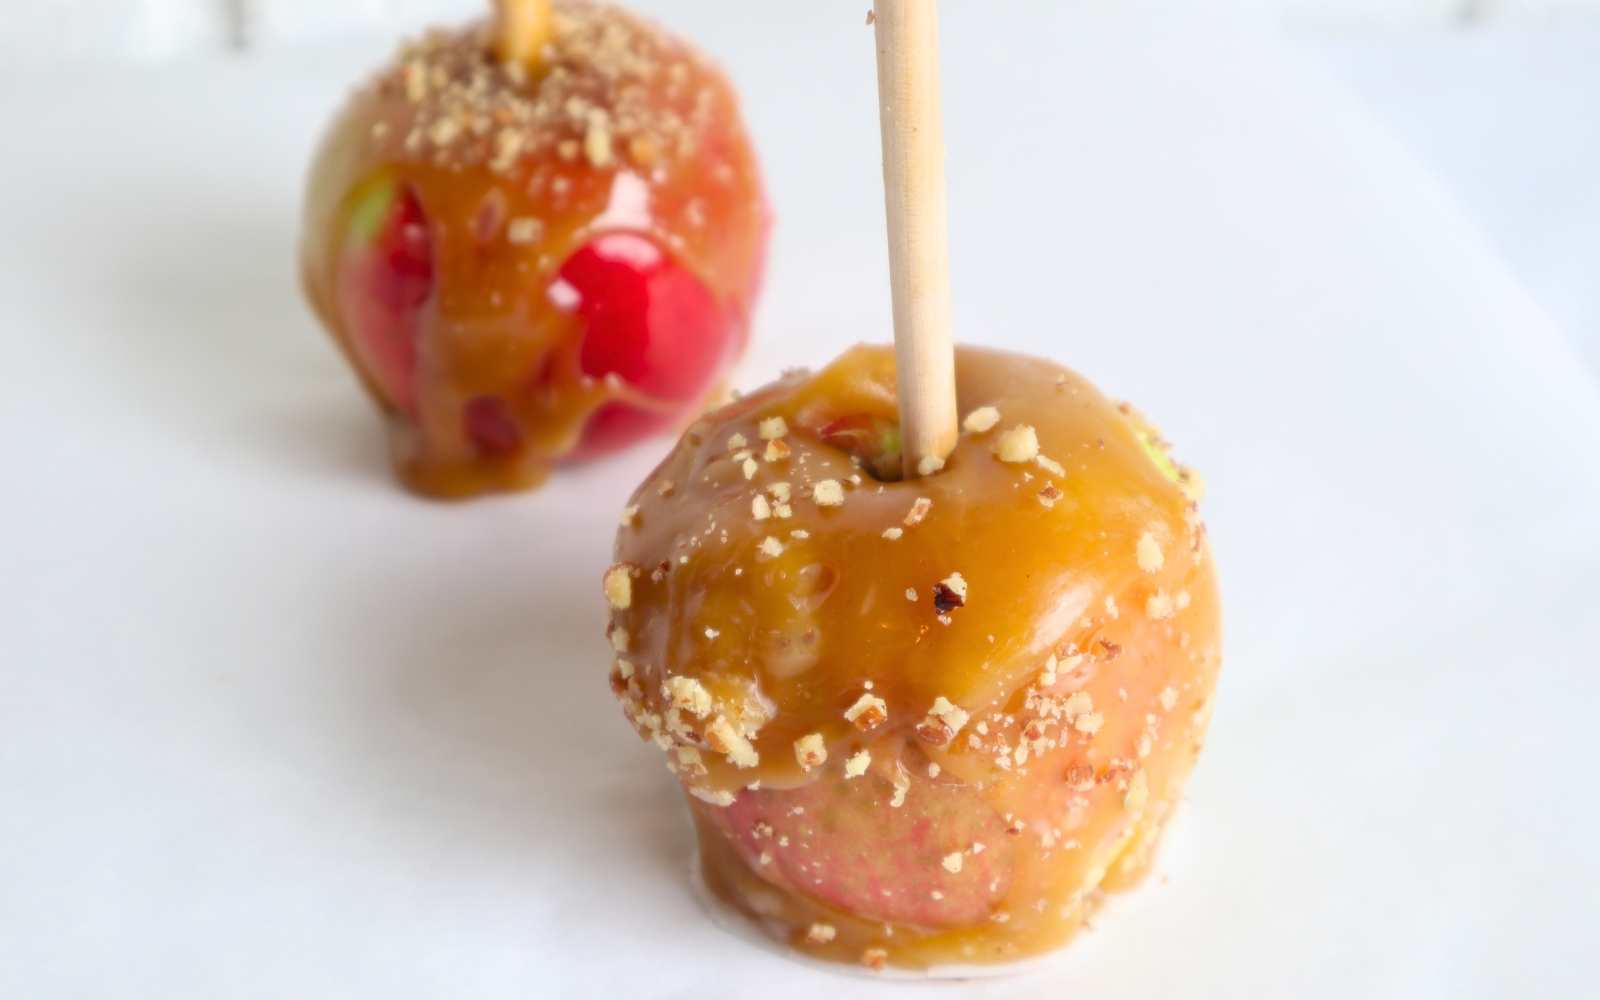 two caramel apples with ground nuts on them